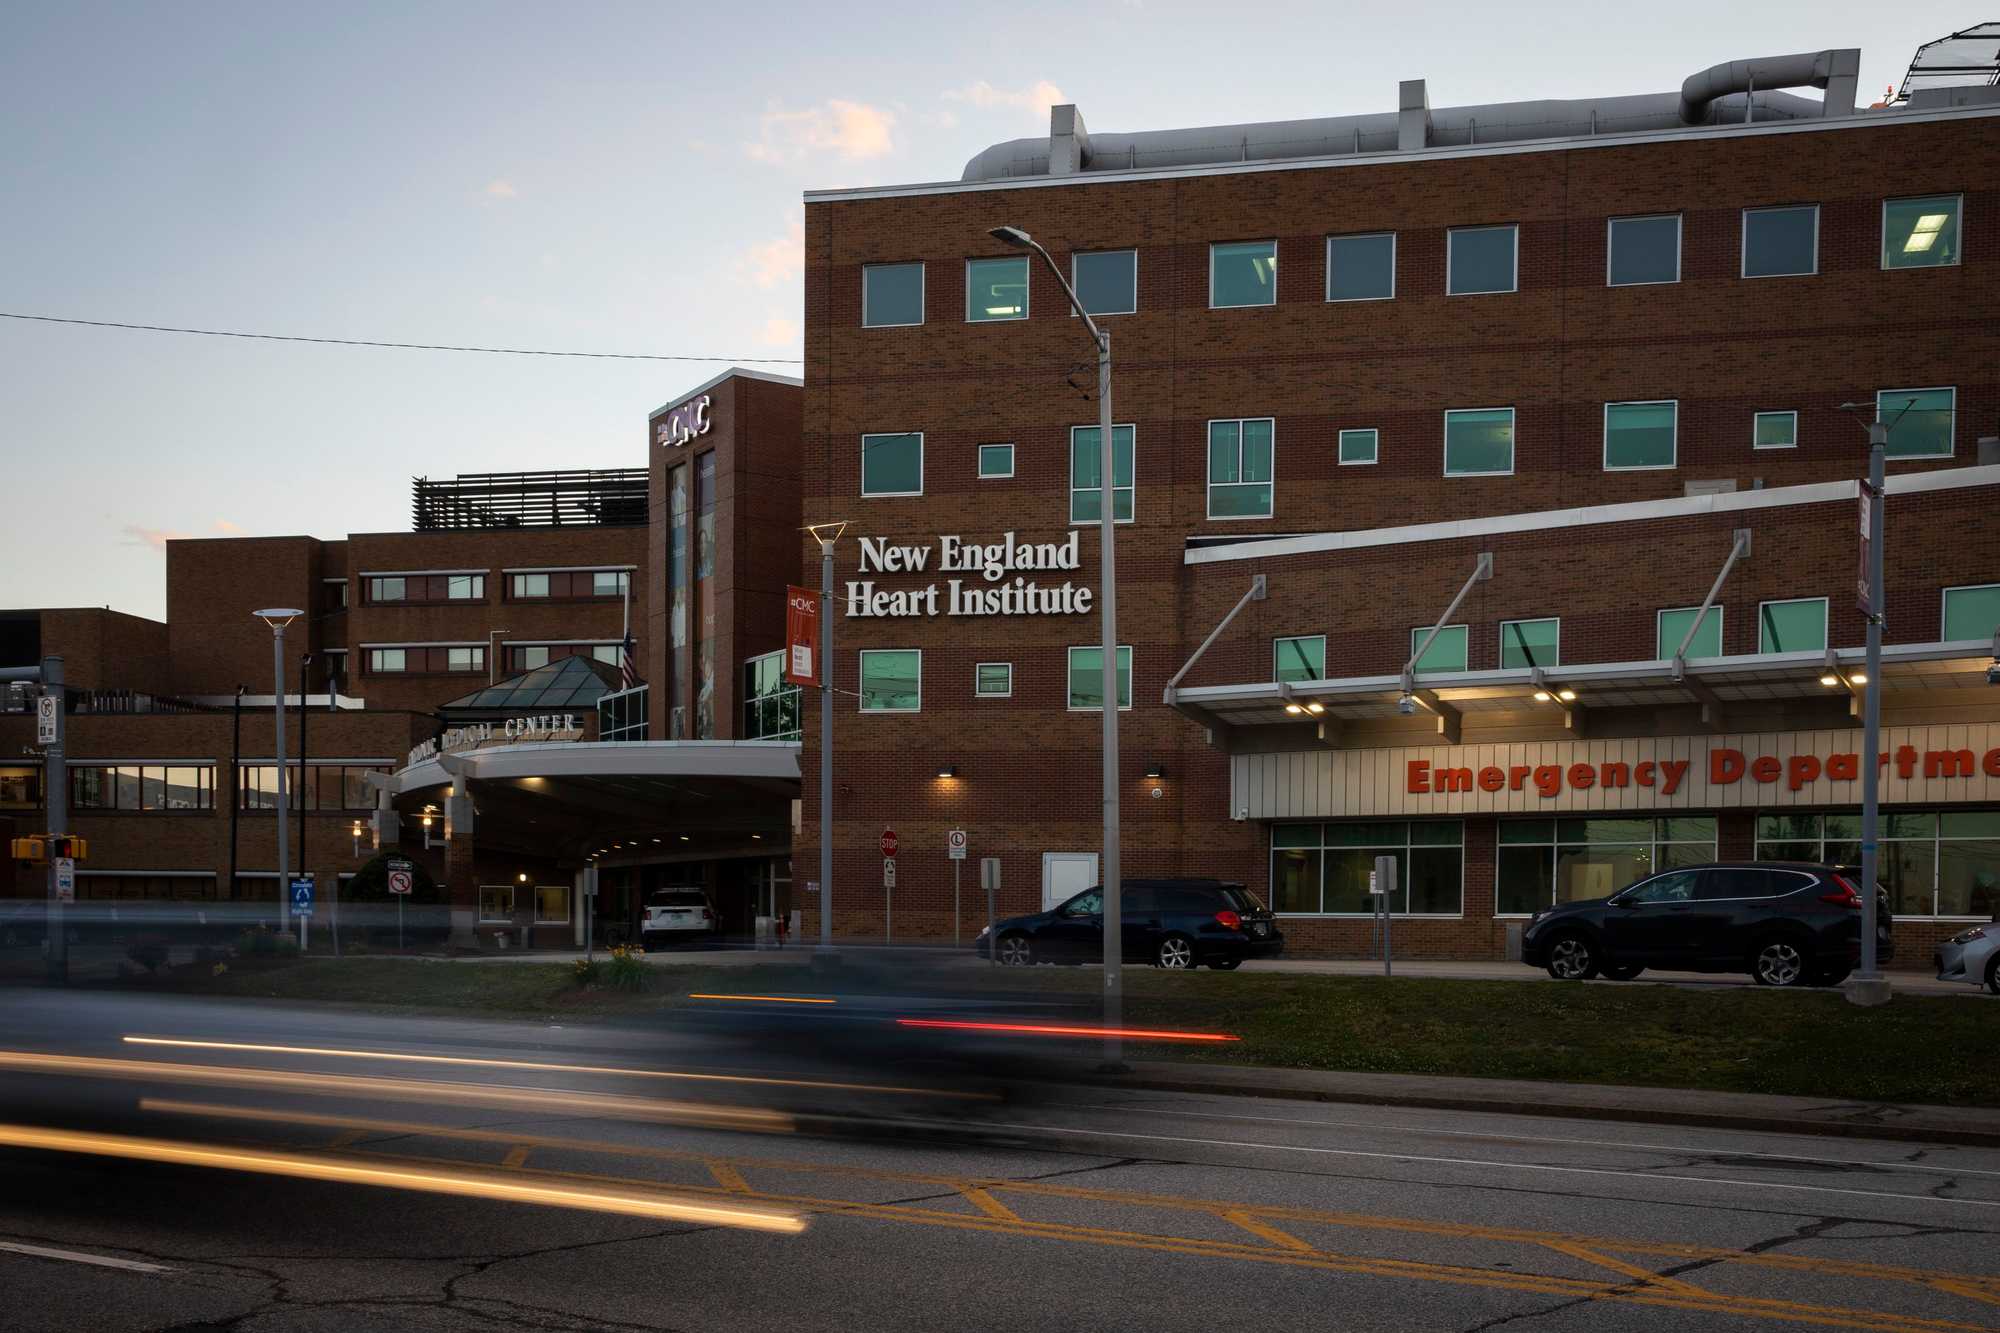 The 330-bed Catholic Medical Center and its flagship heart institute, where doctors perform hundreds of open-heart surgeries each year.